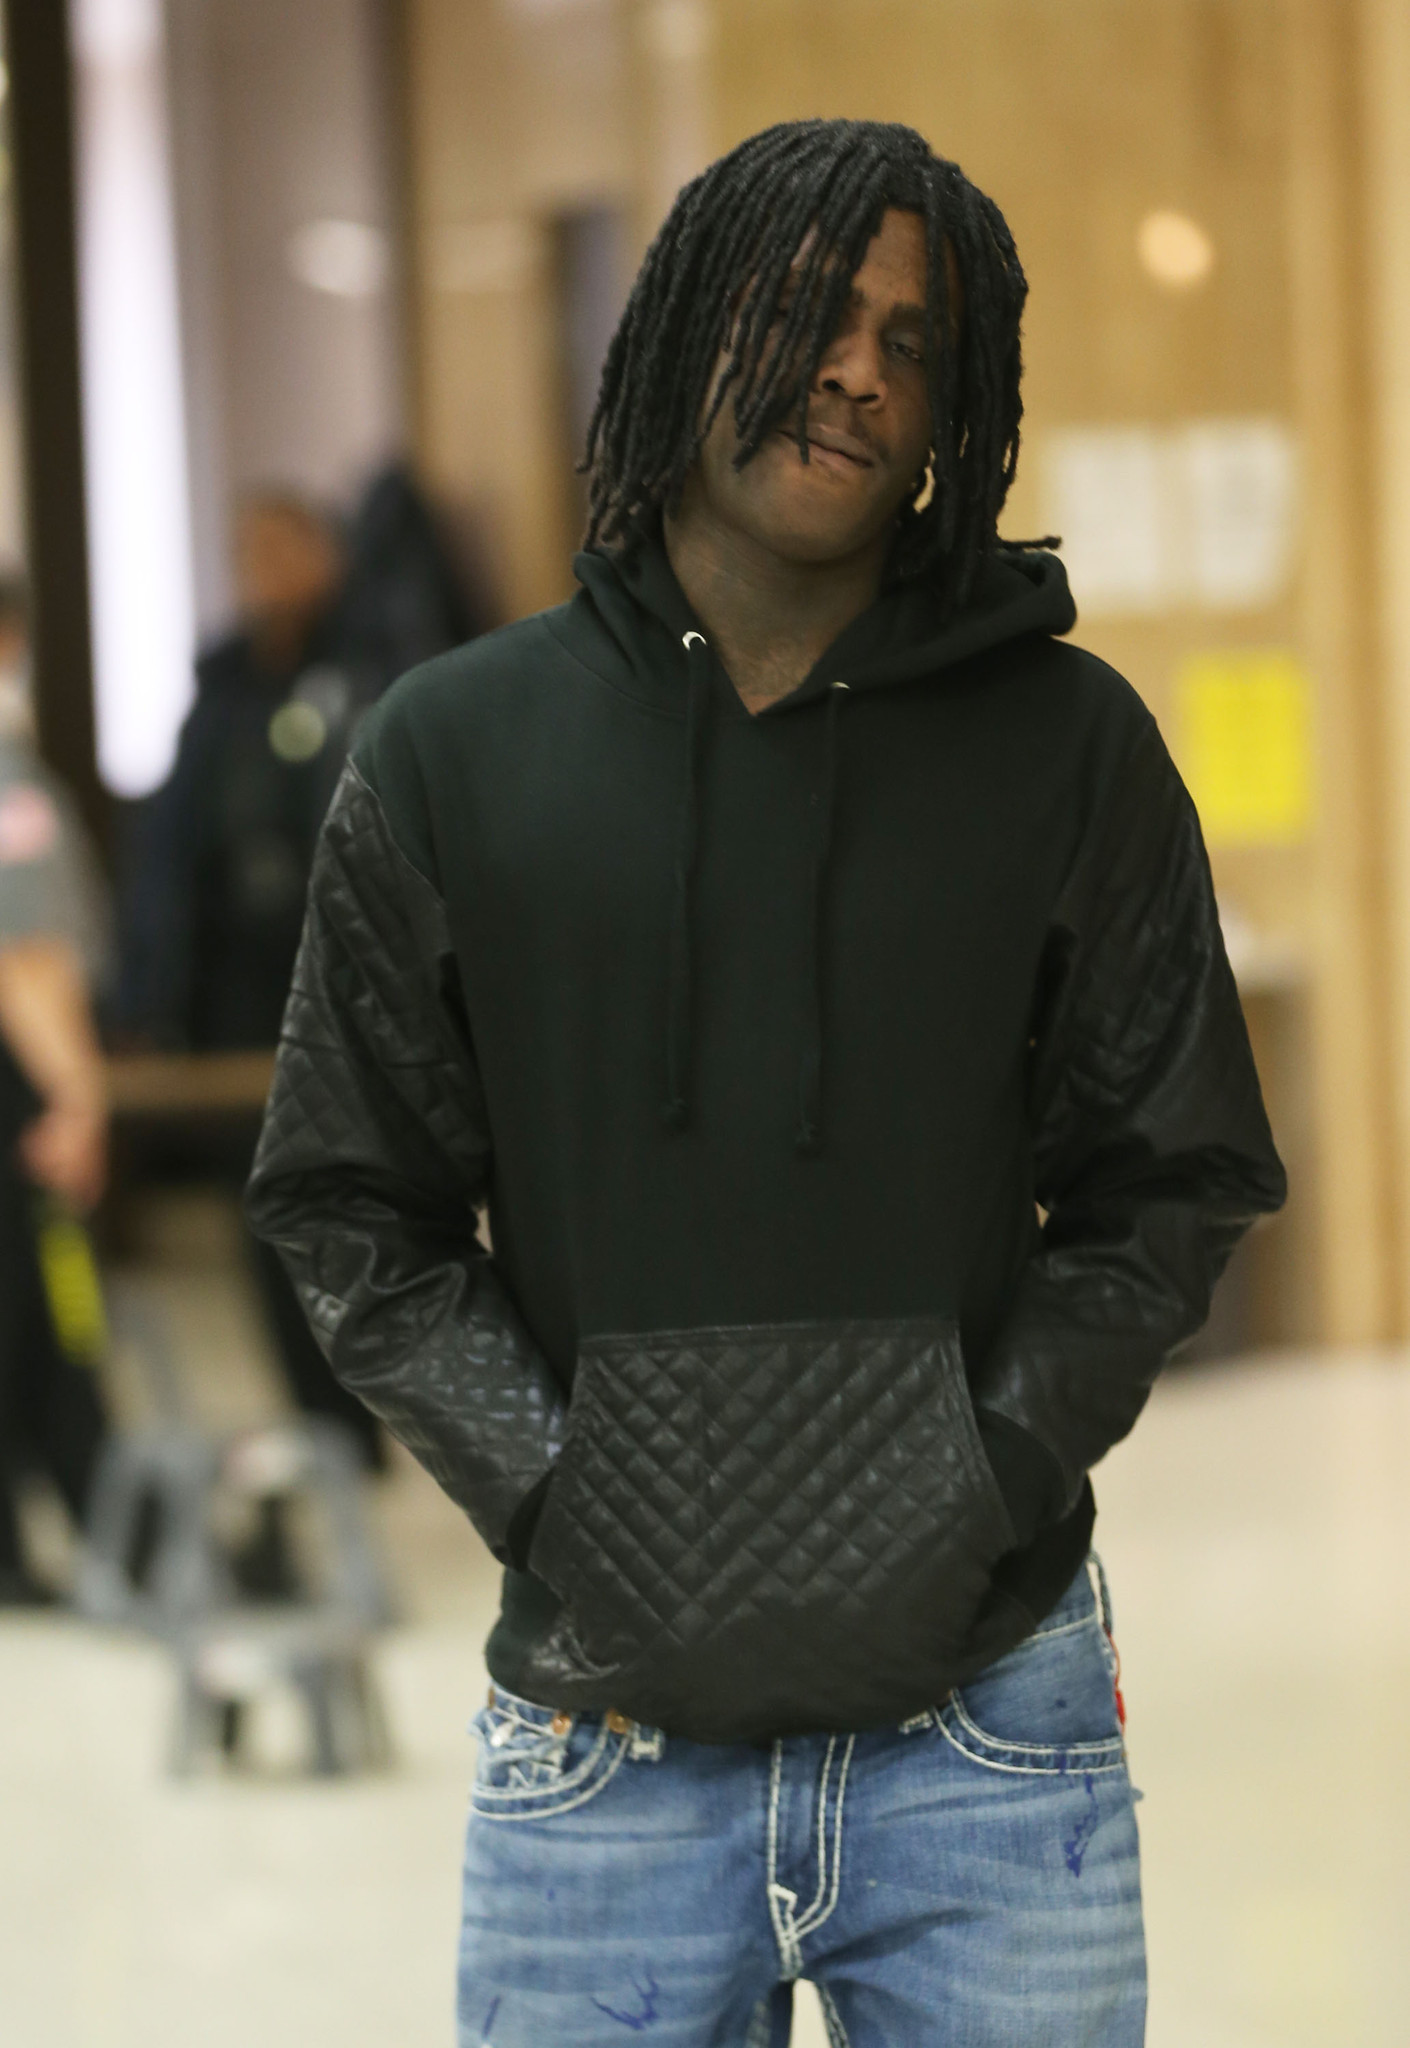 Chicago Rapper Chief Keef's Benefit concert in Chicago  for slain toddler postponed. 